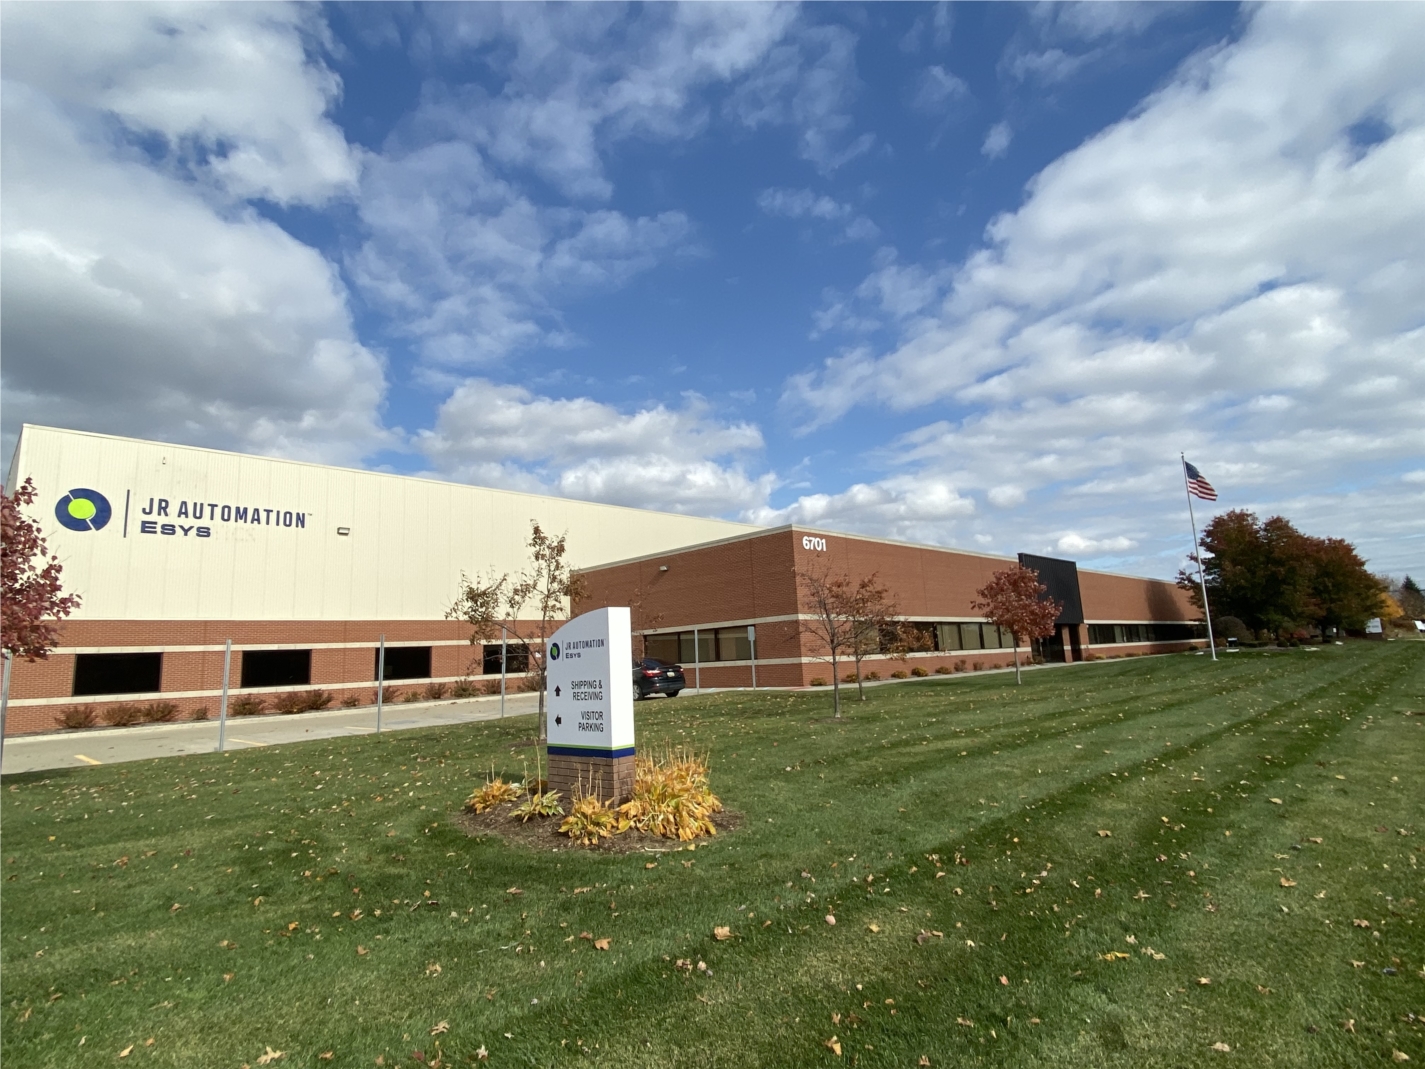 We are excited to share that Esys has recently expanded to three facilities, located in Auburn Hills, Pontiac and Sterling Heights, MI. We are looking to fill many engineering positions in the next six months. To explore all open positions and apply online, visit www.esysautomation.com/careers.